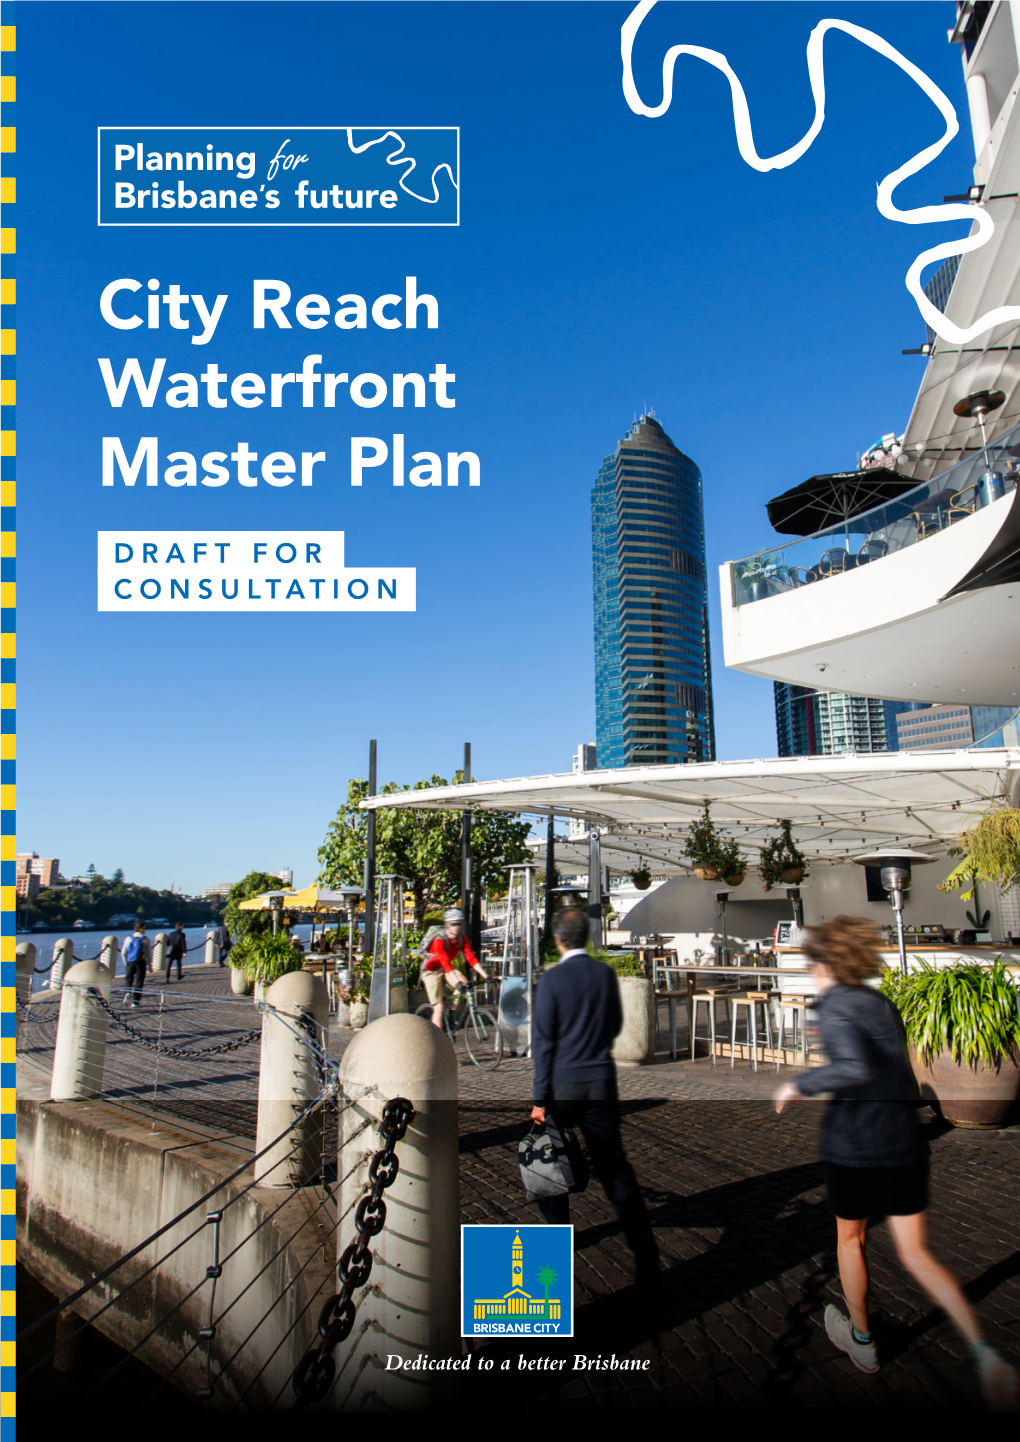 City Reach Waterfront Master Plan – Draft for Consultation